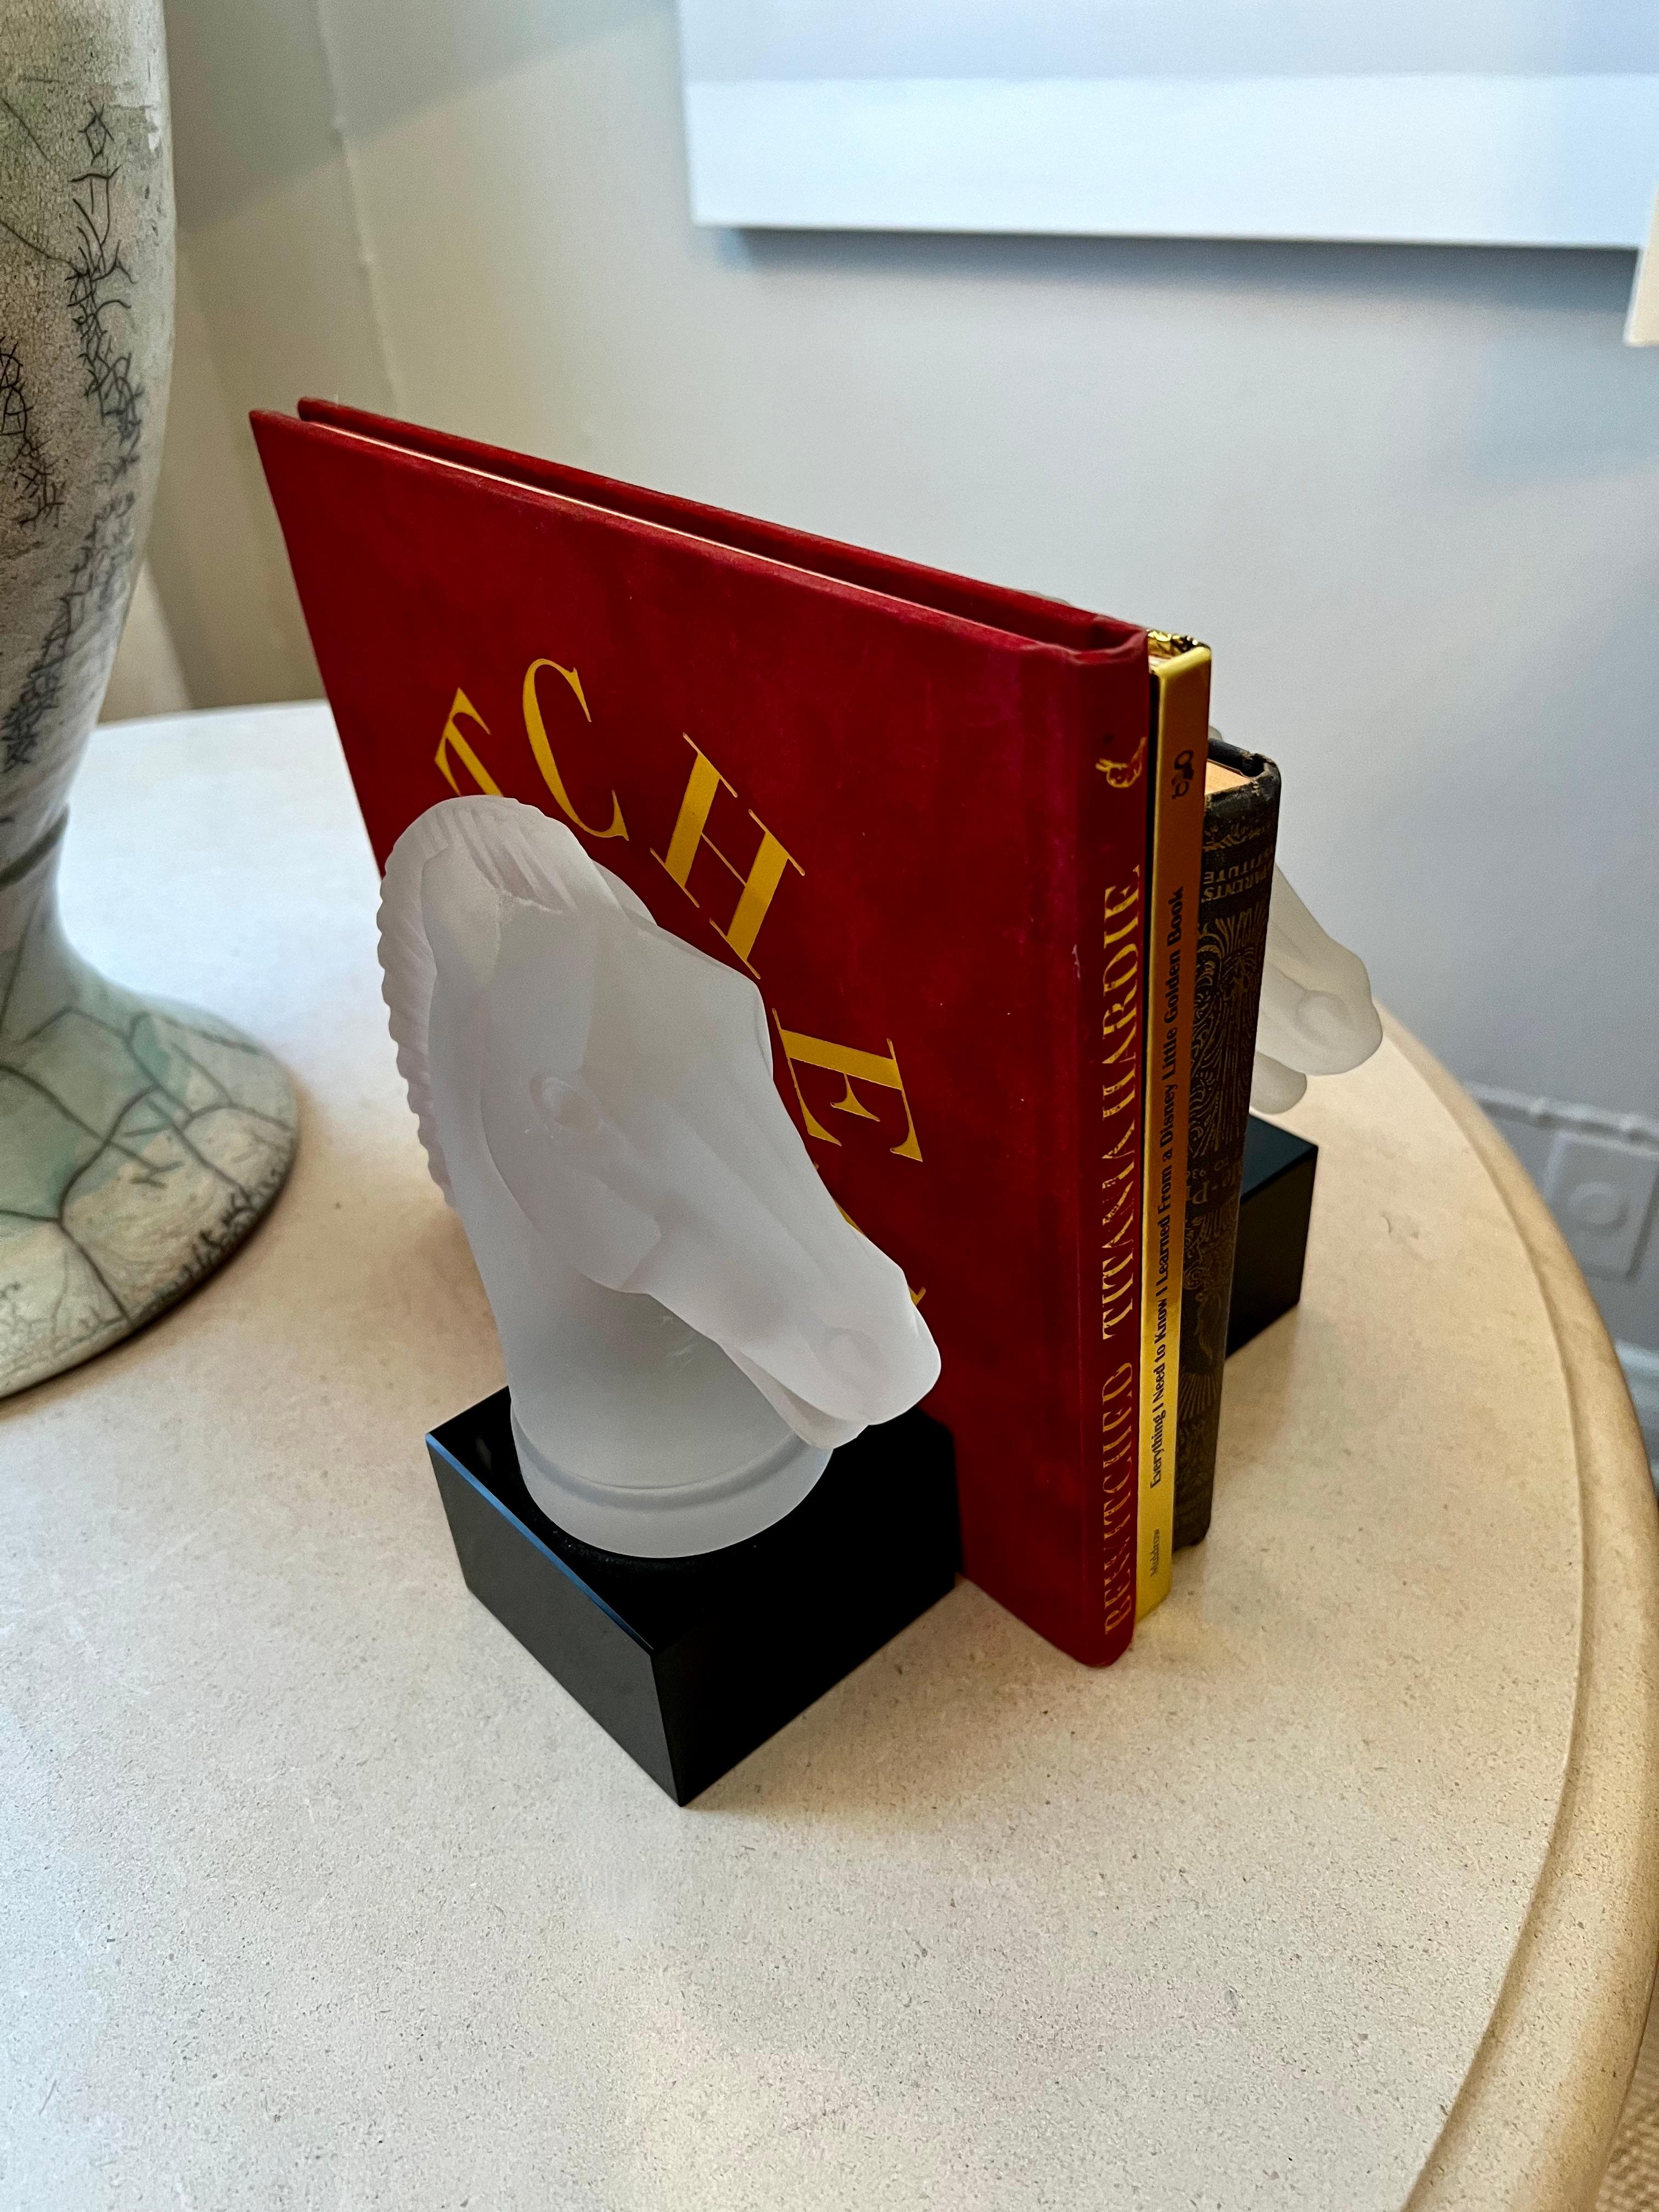 Pair of Solid glass Horse head bookends with solid black glass base. The pair are wonderful and are very reminiscent of Lalique. Very sophisticated at over 2 pounds each - heavy and substantial. could be used purely as decorative flanking a mantle,